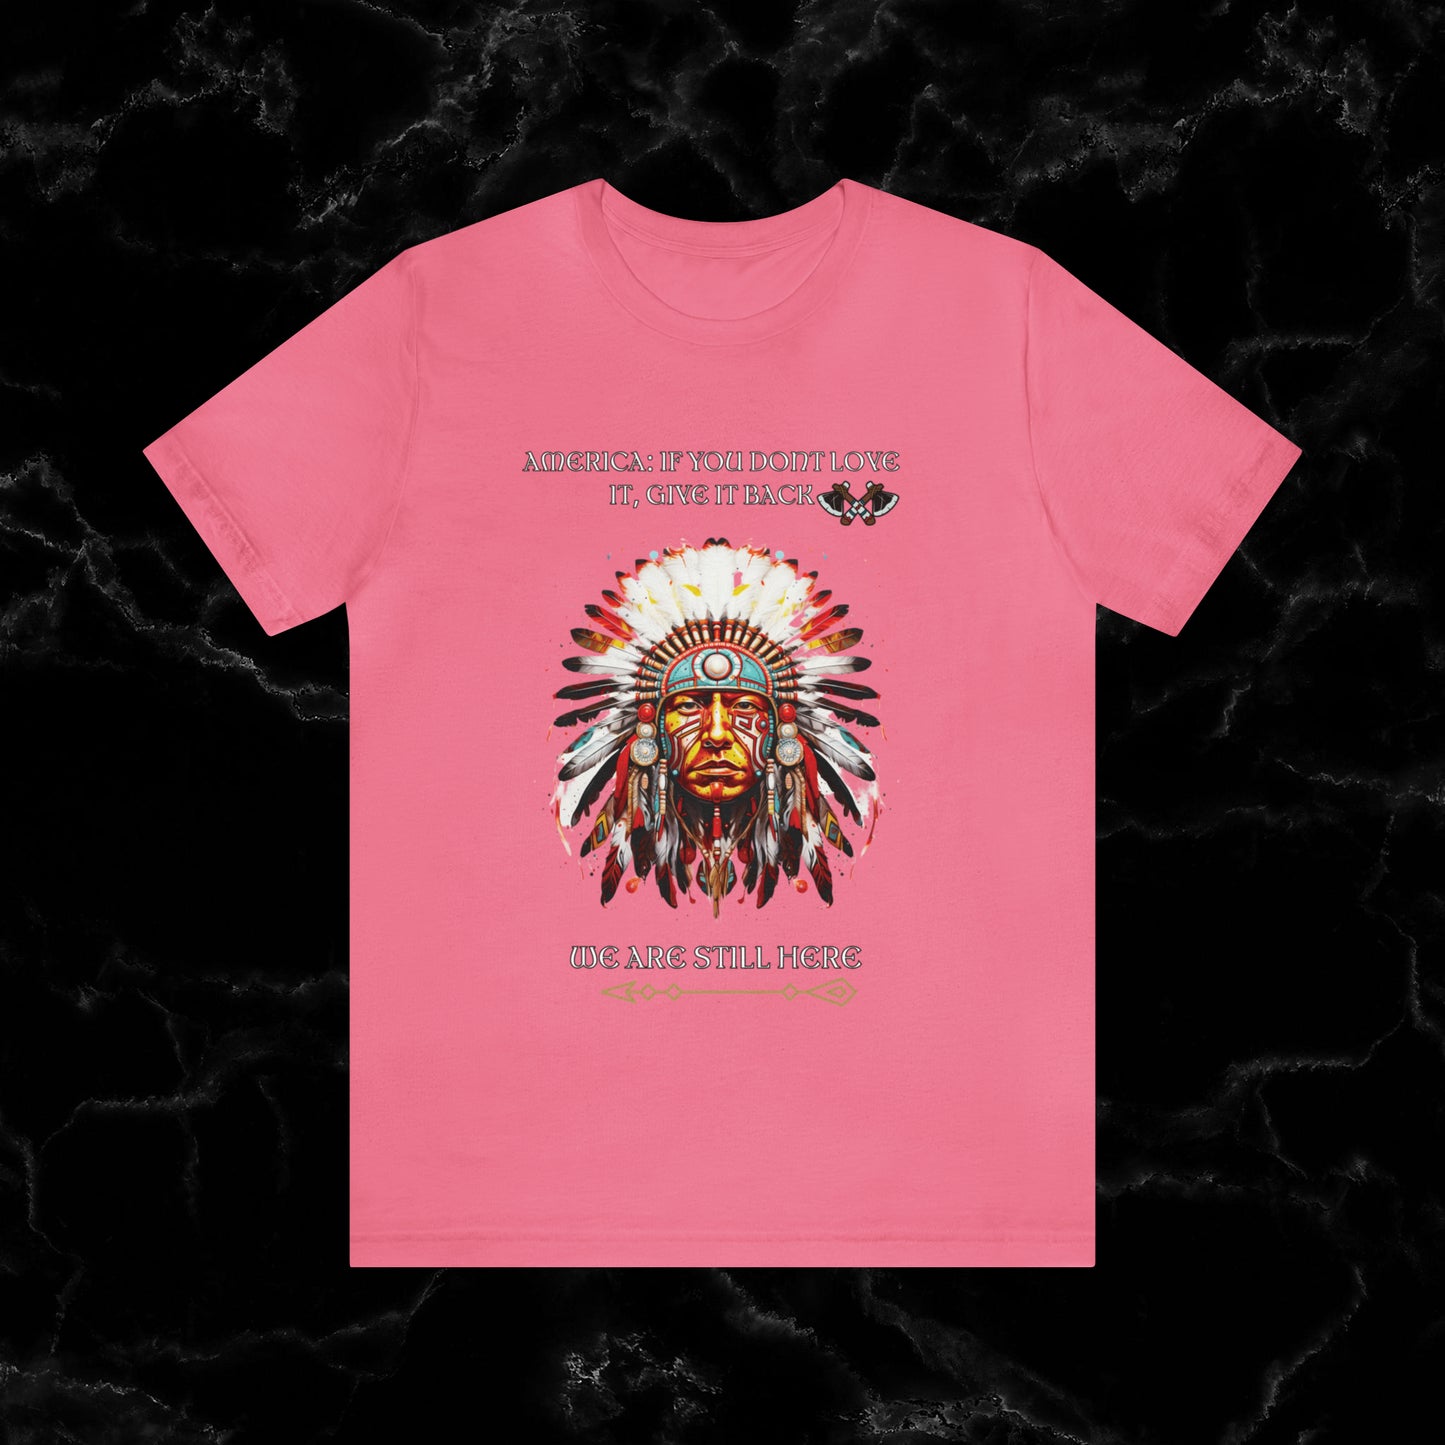 America Love it Or Give It Back Vintage T-Shirt - Indigenous Native Shirt T-Shirt Charity Pink S 